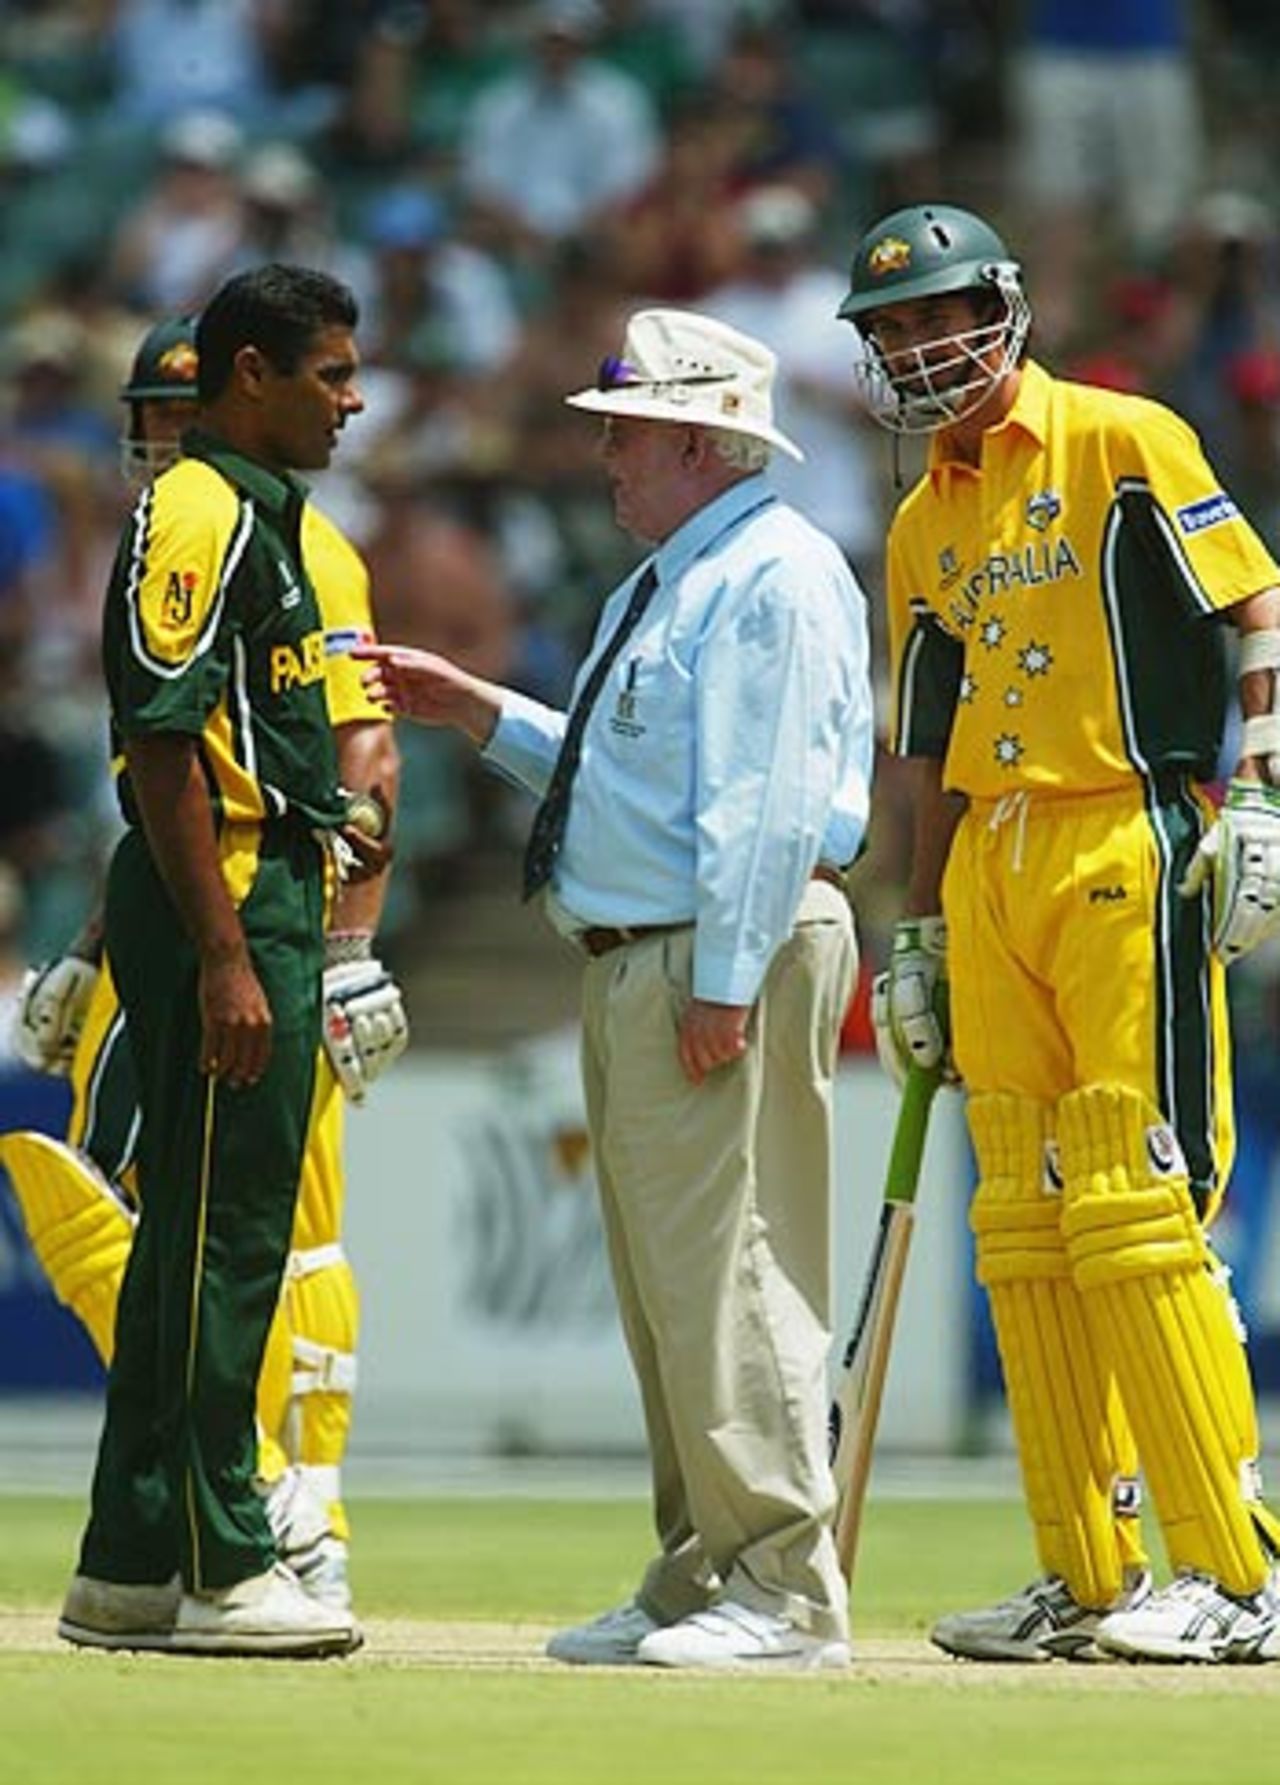 Bad boy Waqar. Shepherd warns Younis after he bowled two beamers in a World Cup 2003 match against Australia at Johannesburg, February 11, 2003
